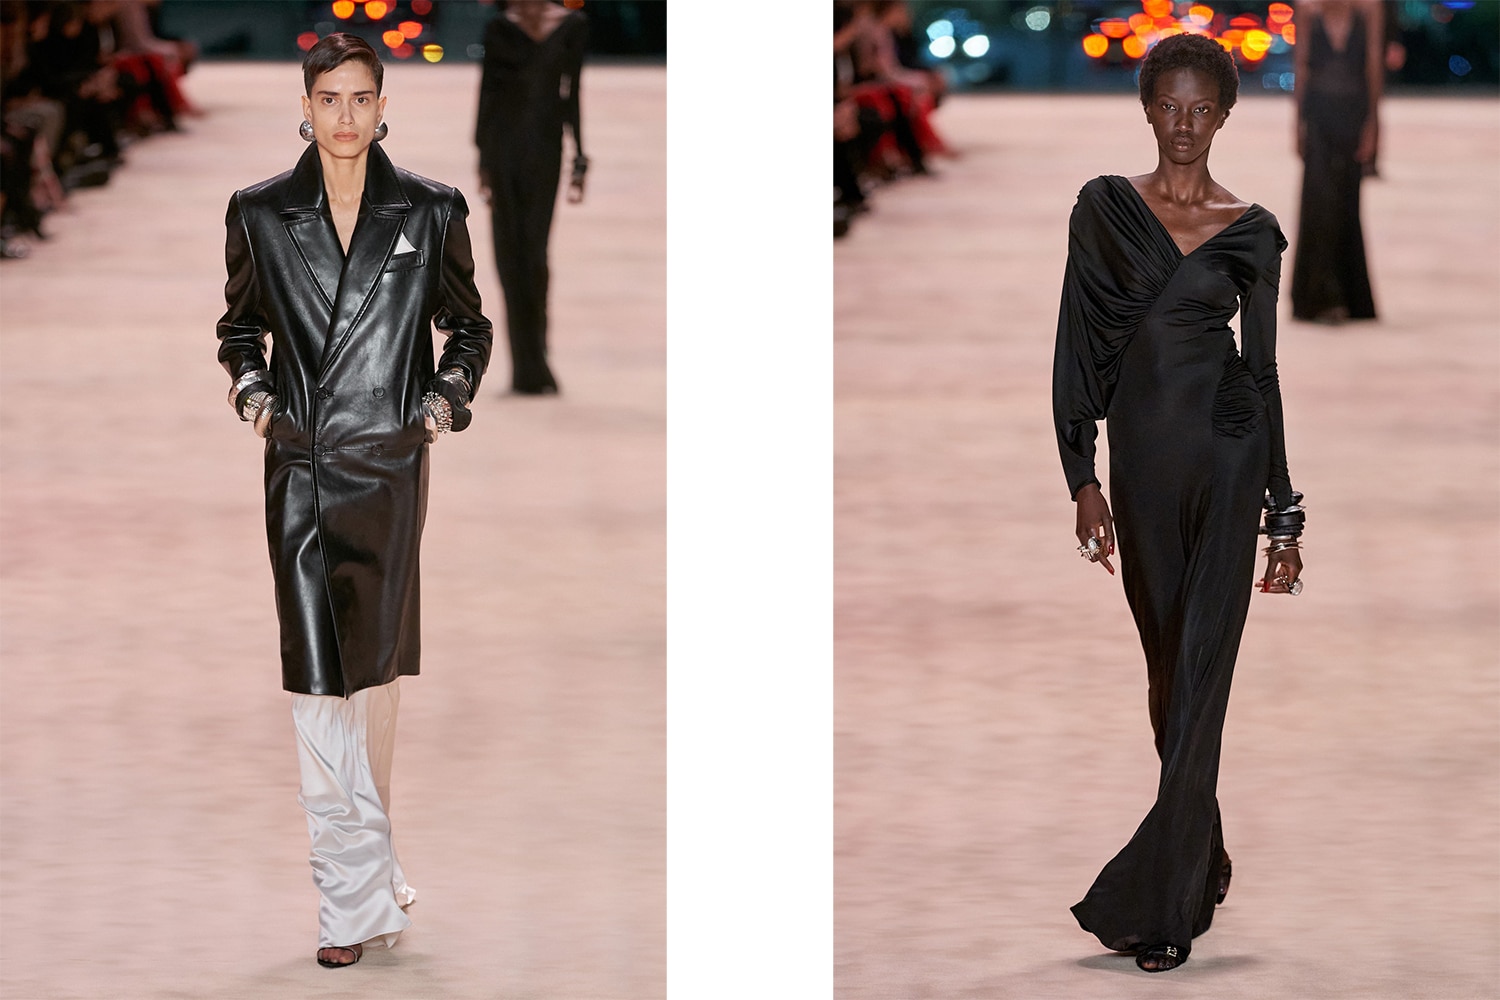 For Saint Laurent Winter 2022, Vaccarello's girl becomes a woman